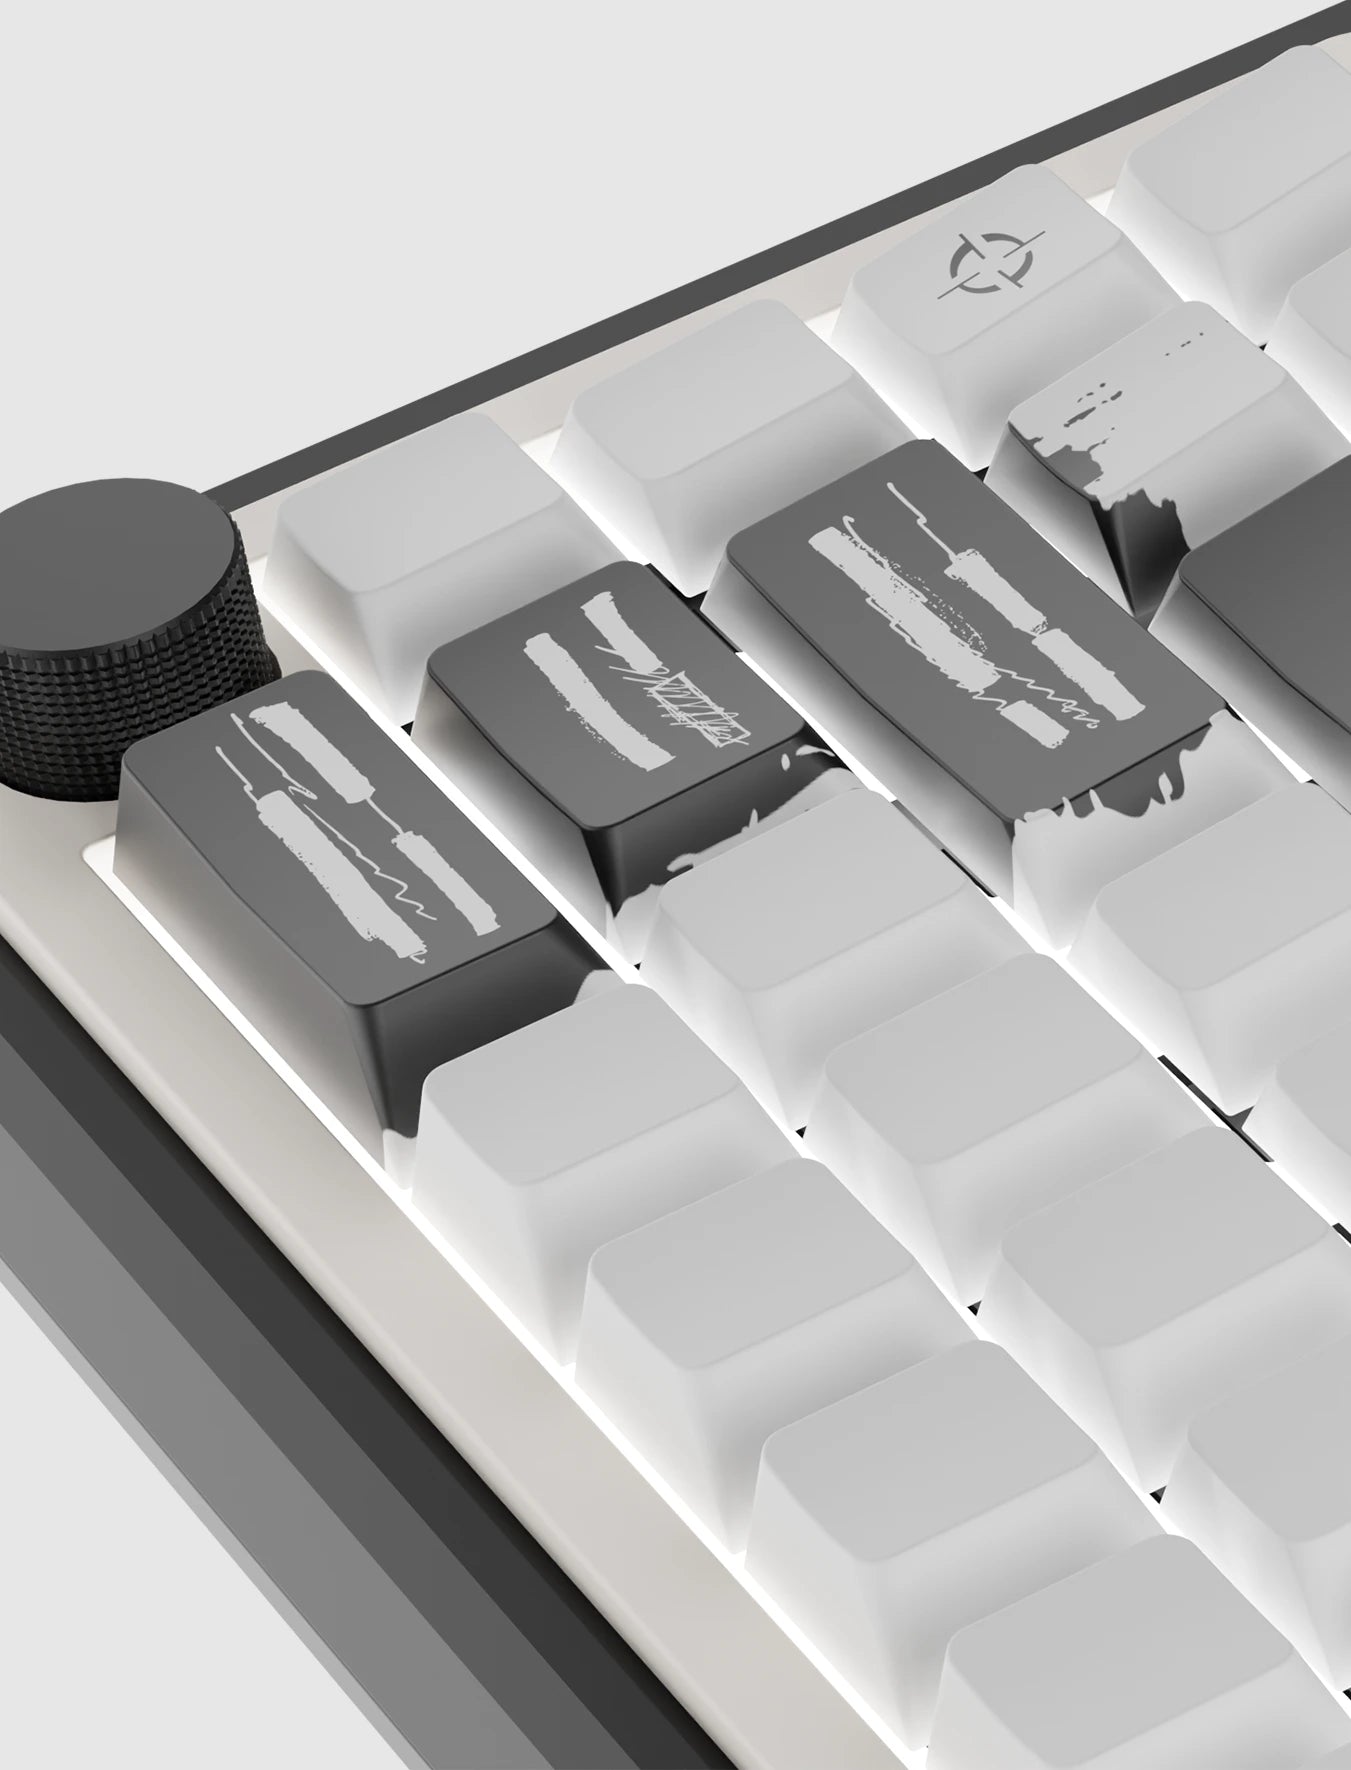 Tryhard - Le clavier mécanique gasquet ultra-compact